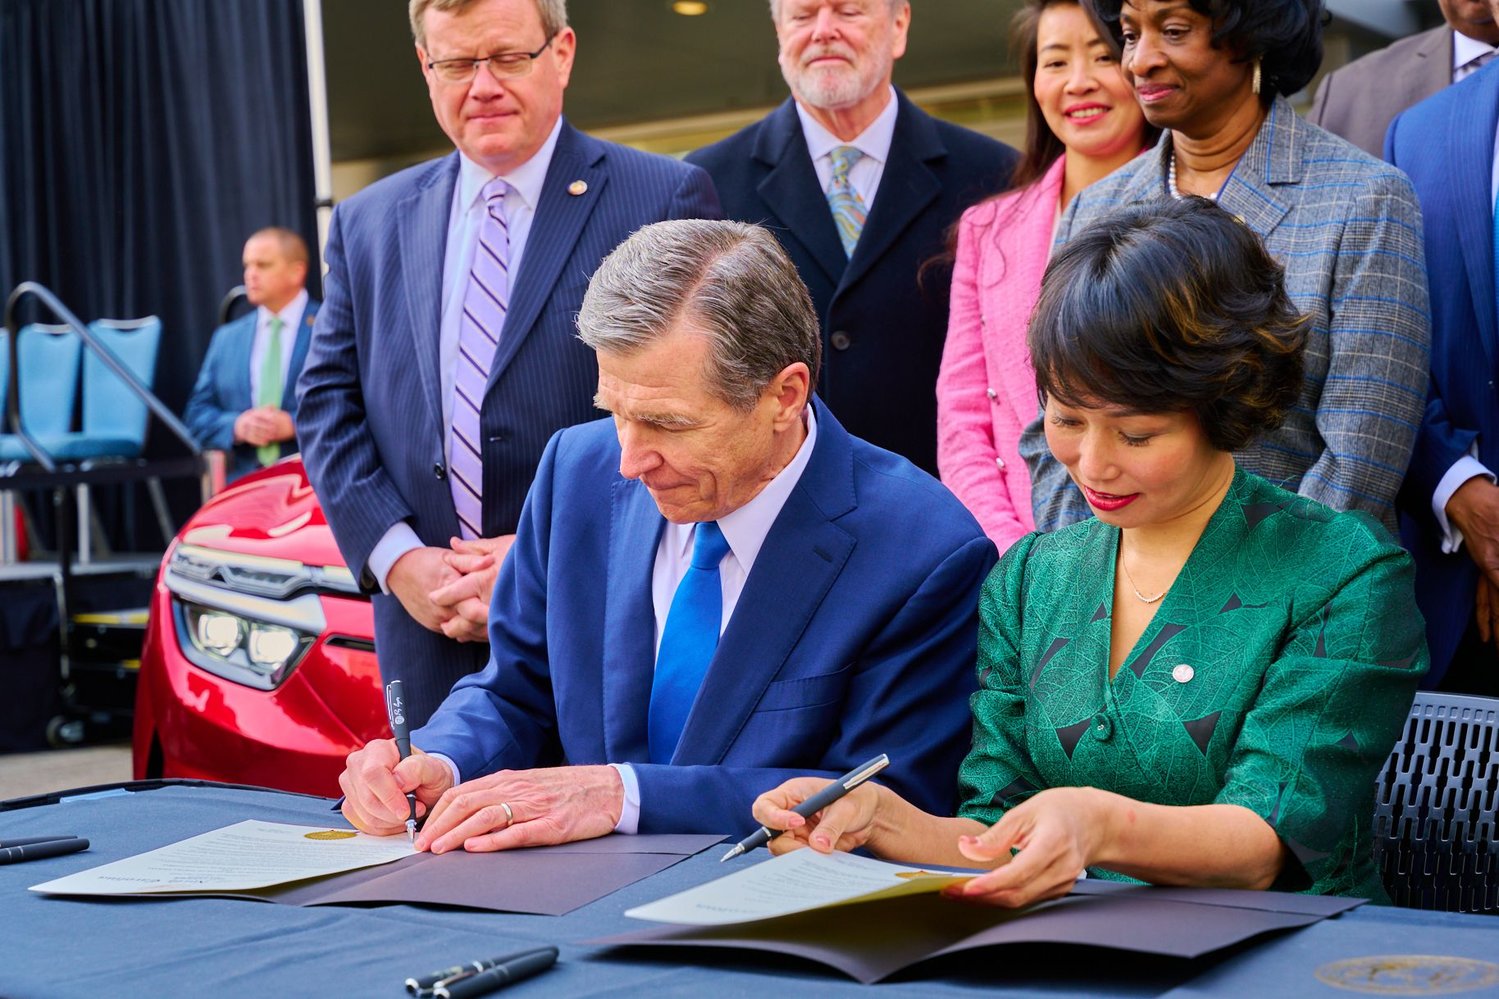 N.C. Gov. Roy Cooper (left) and Vingroup's vice chairman and CEO of VinFast Global, Le Thi Thu Thuy, sign a memorandum of understanding that brings VinFast — and with it, 7,500 jobs at N.C.'s first automotive plant — to Chatham County.